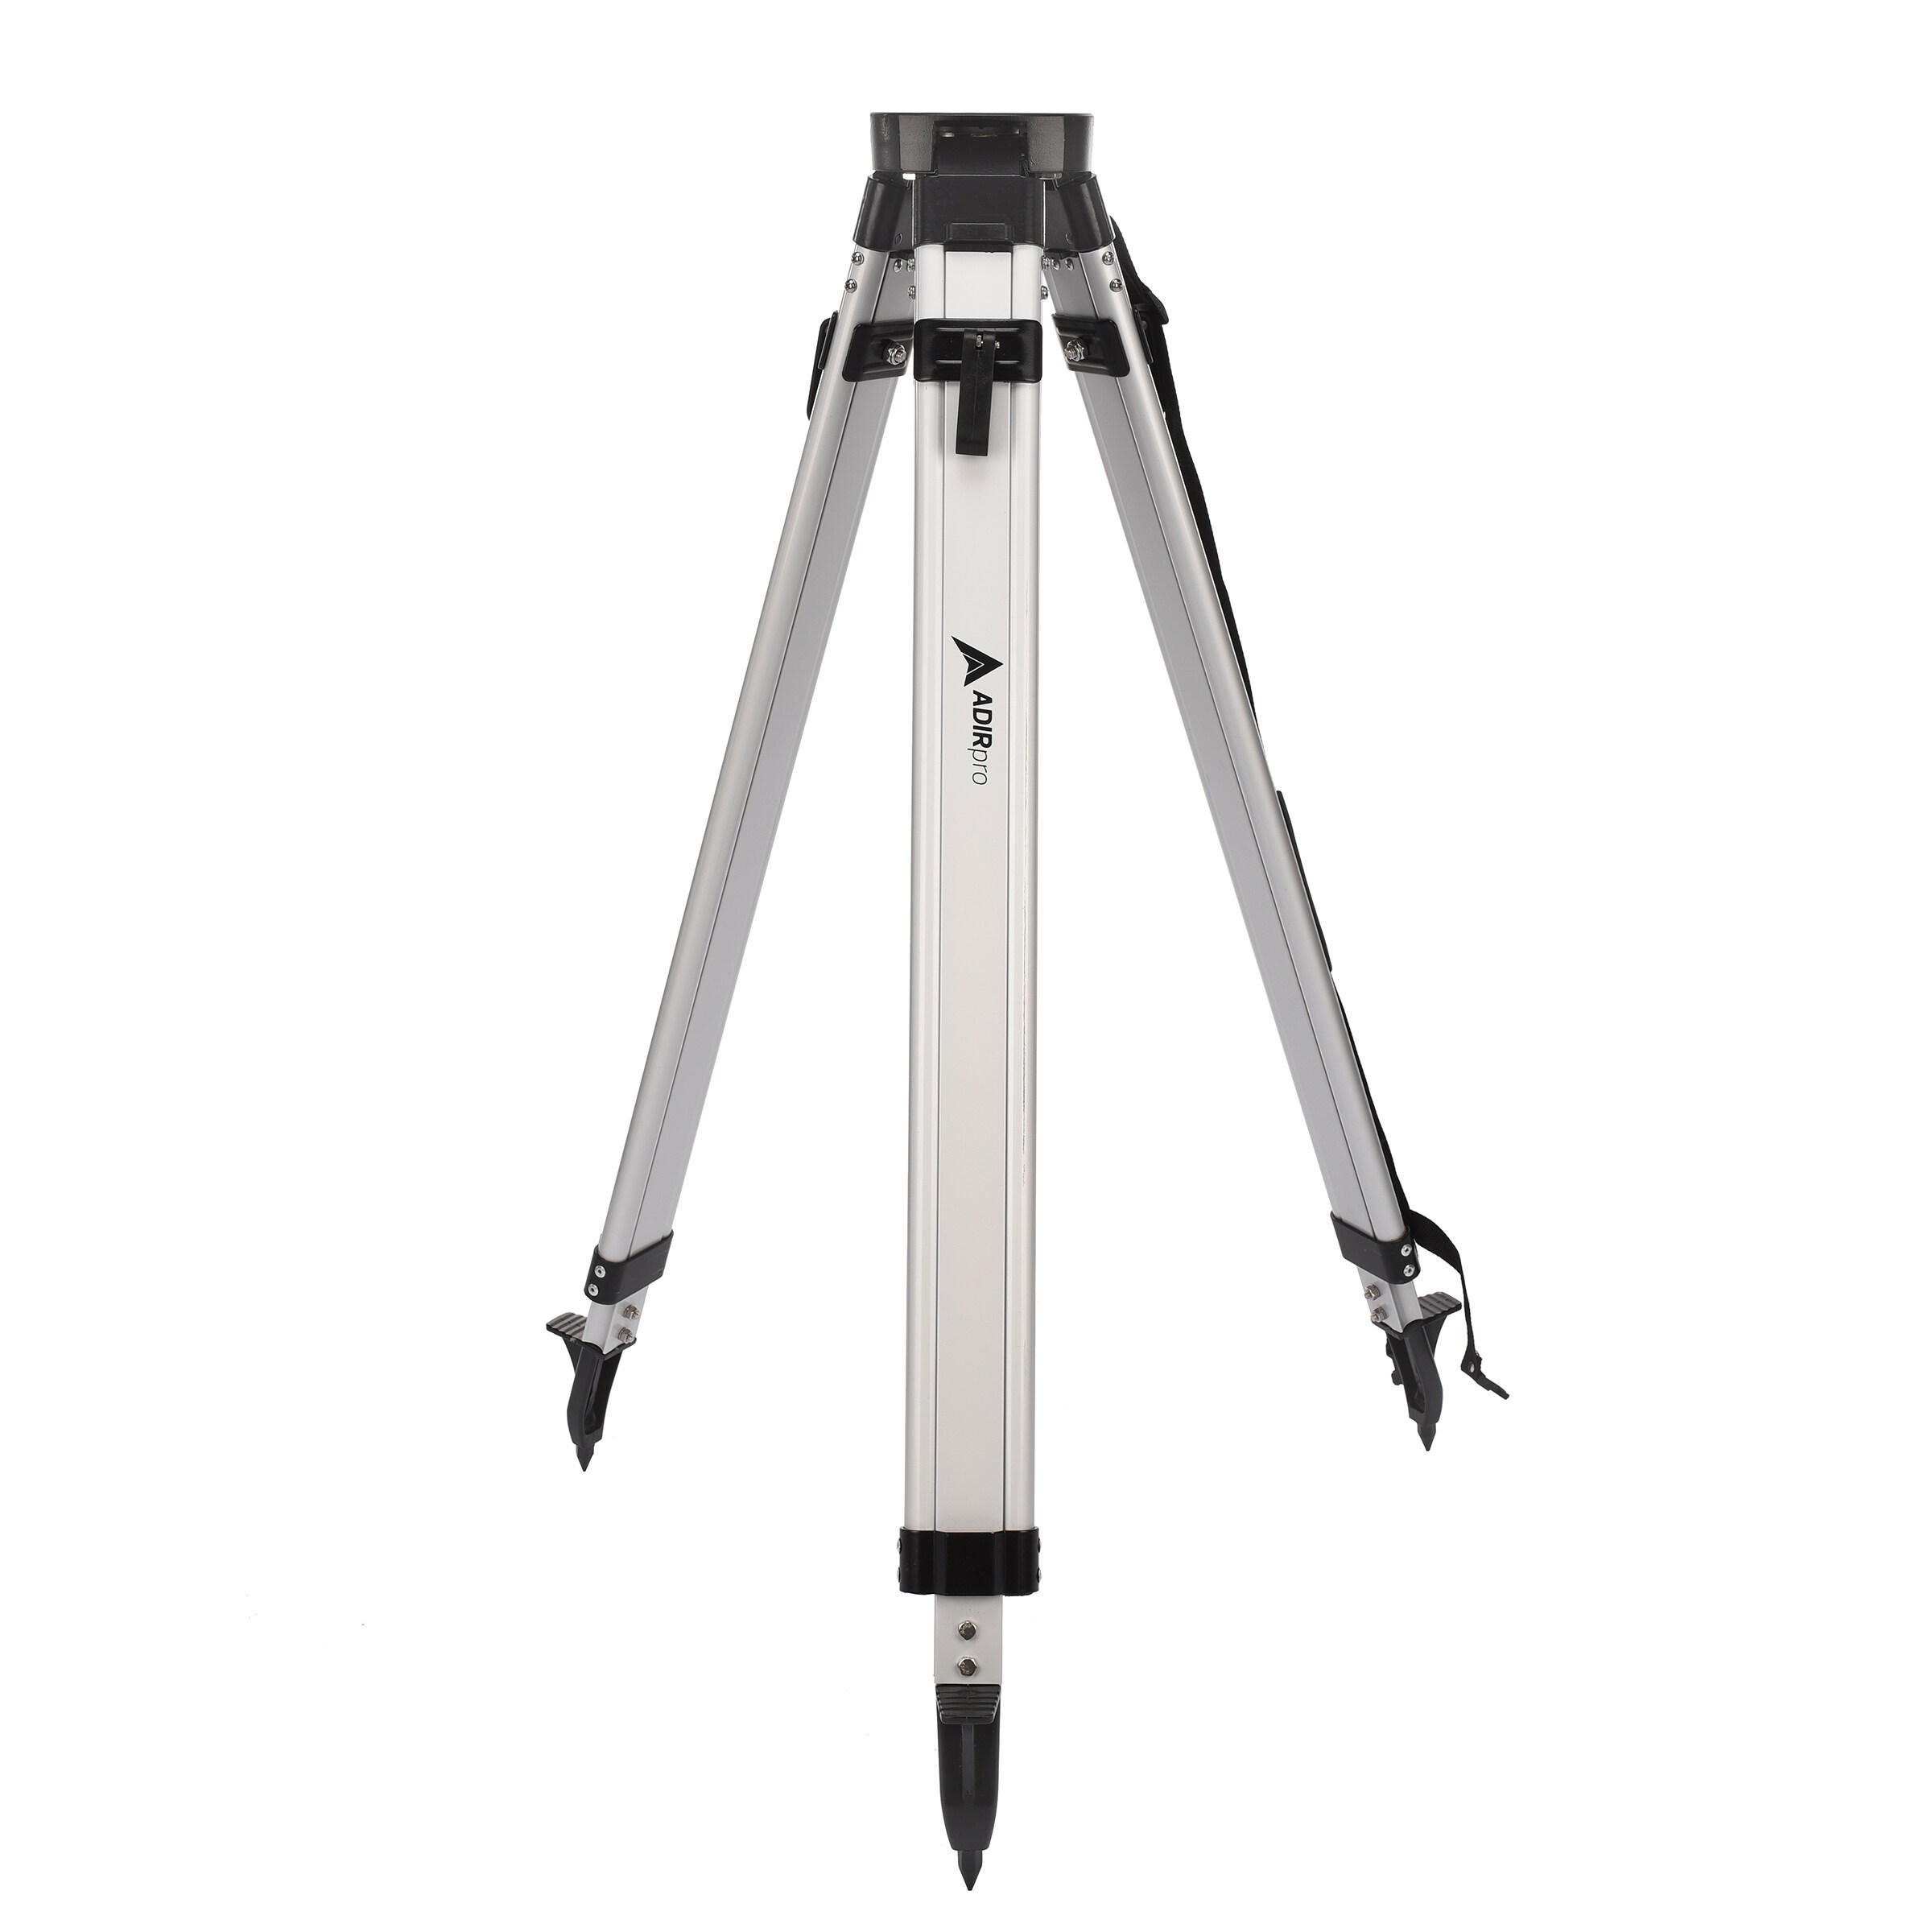 USED LEICA EXTRA TALL HEAVY DUTY ALUMINUM TRIPOD WITH CRATE 